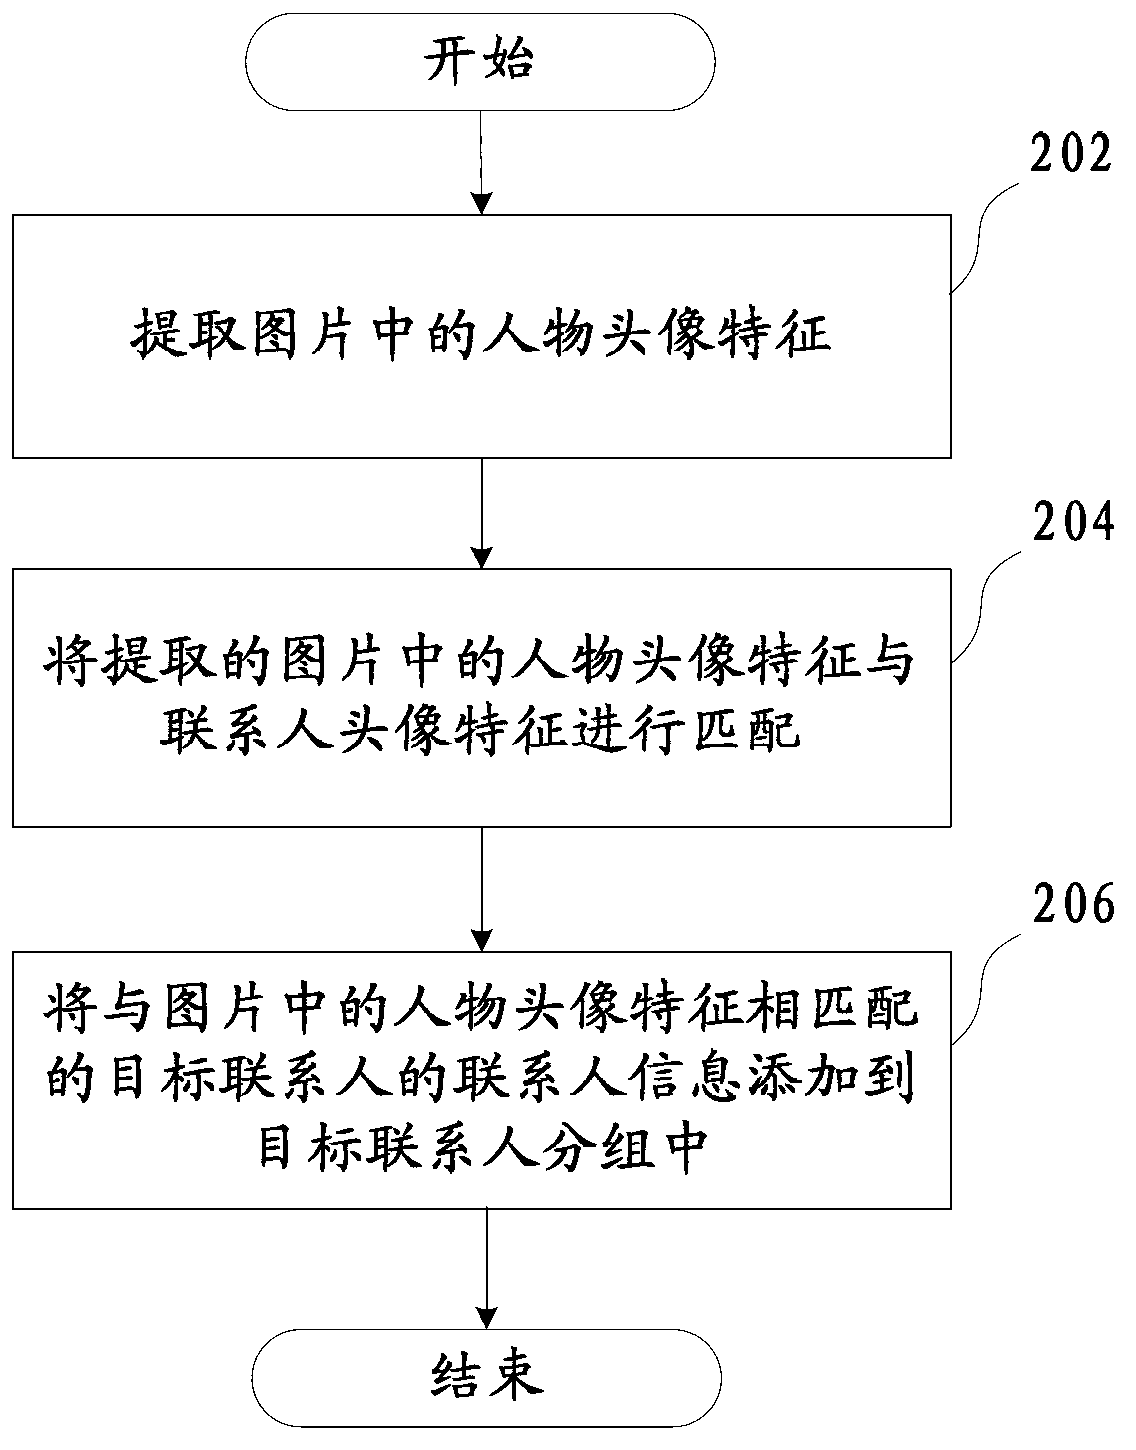 Method and device for grouping contact persons